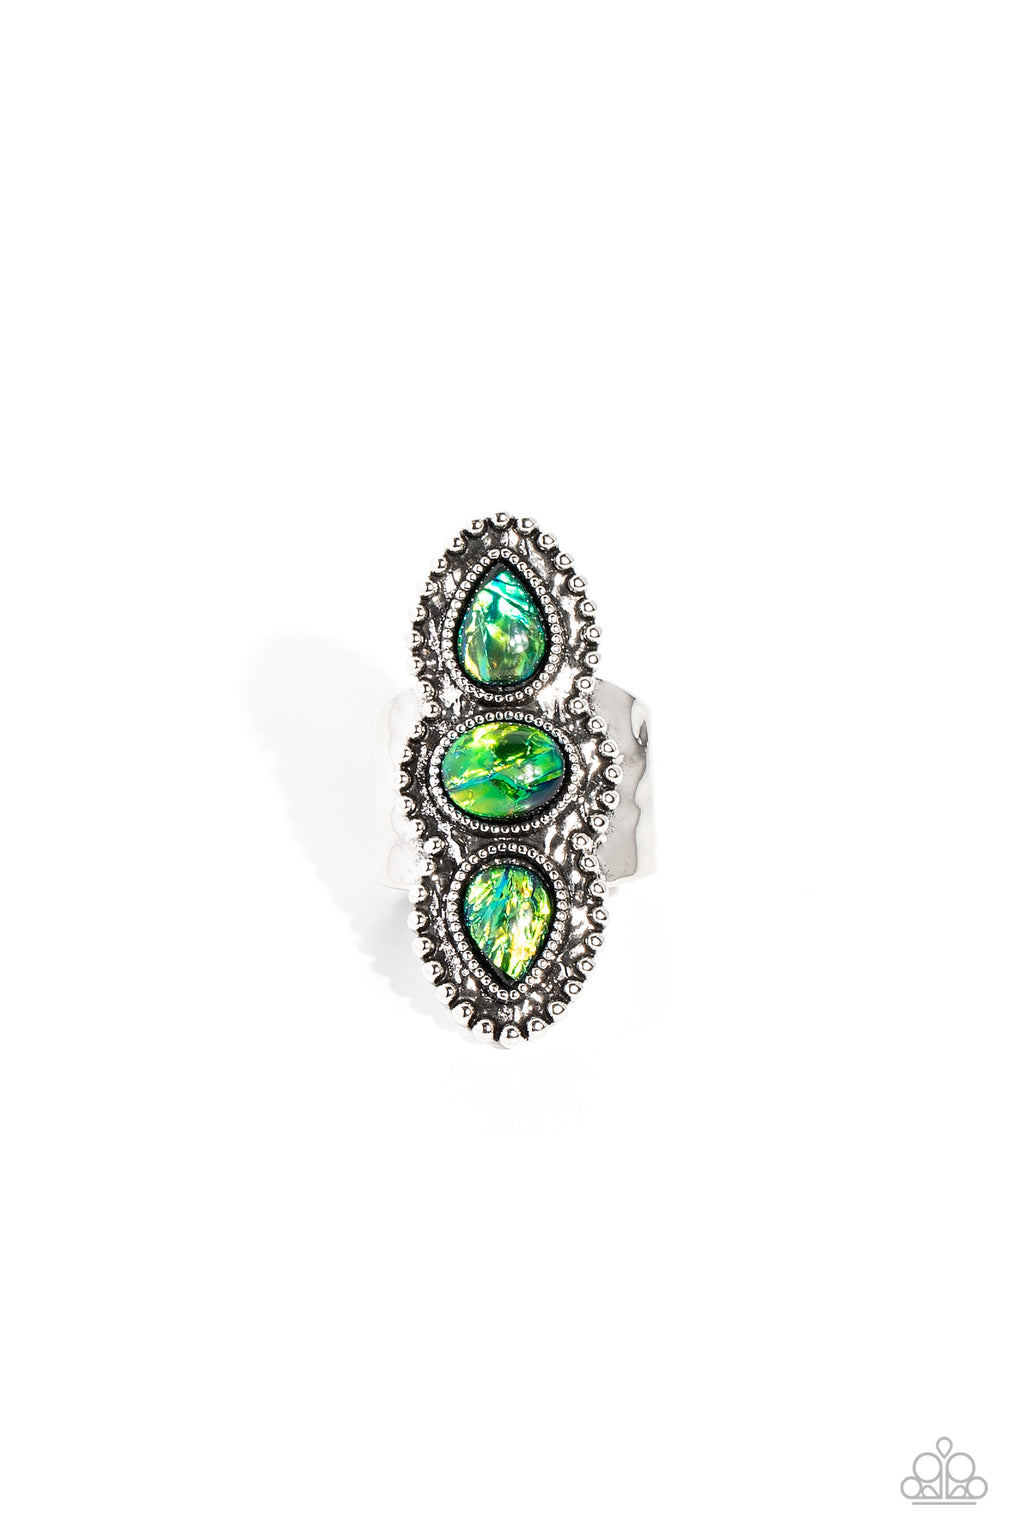 five-dollar-jewelry-strut-your-studs-green-ring-paparazzi-accessories